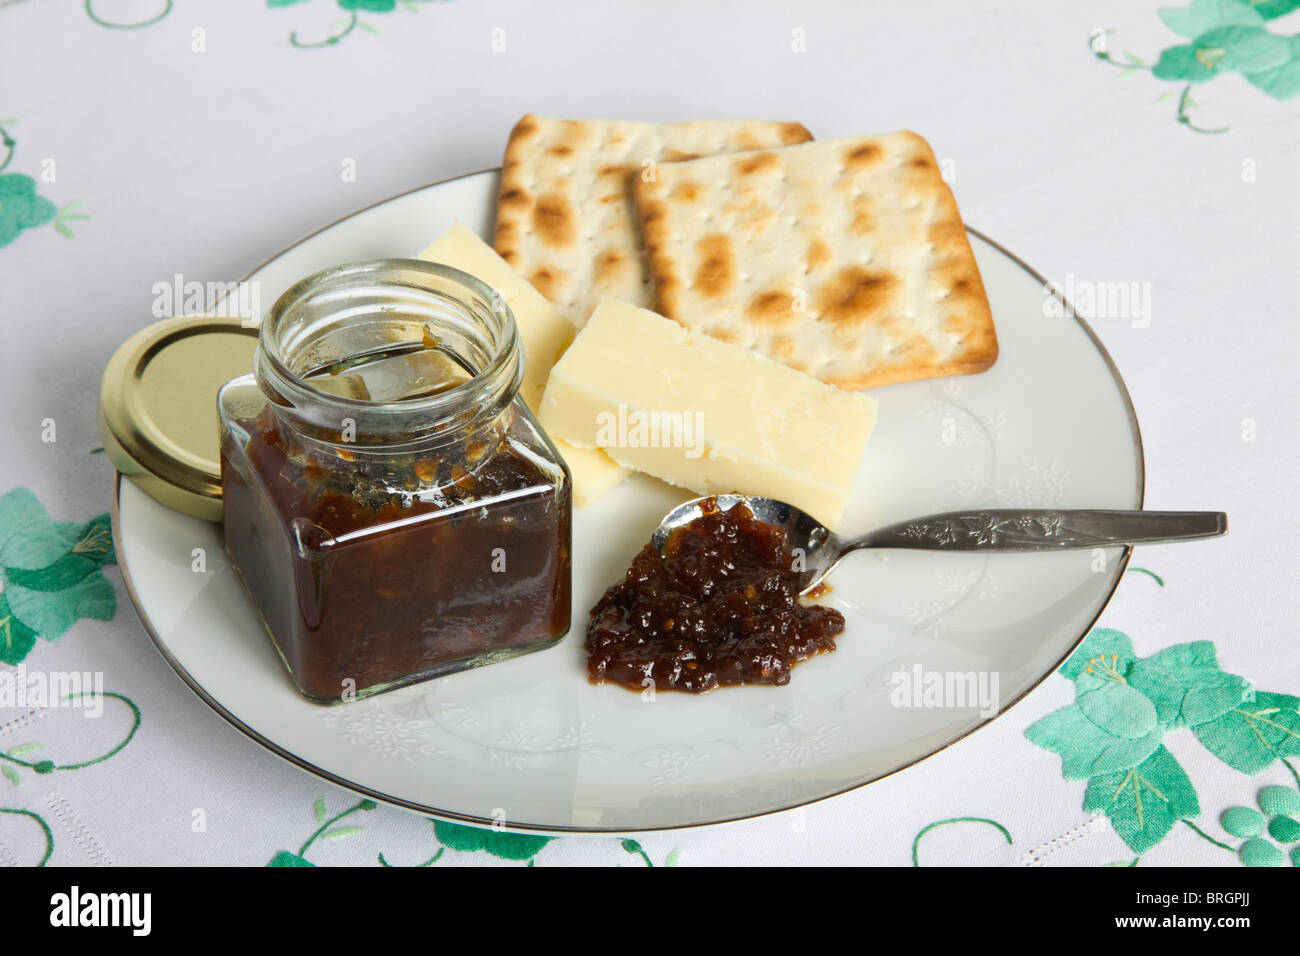 A snack of Cheese, biscuits and a jar of chutney on a white plate placed on tablecloth with green applique embroidery Stock Photo